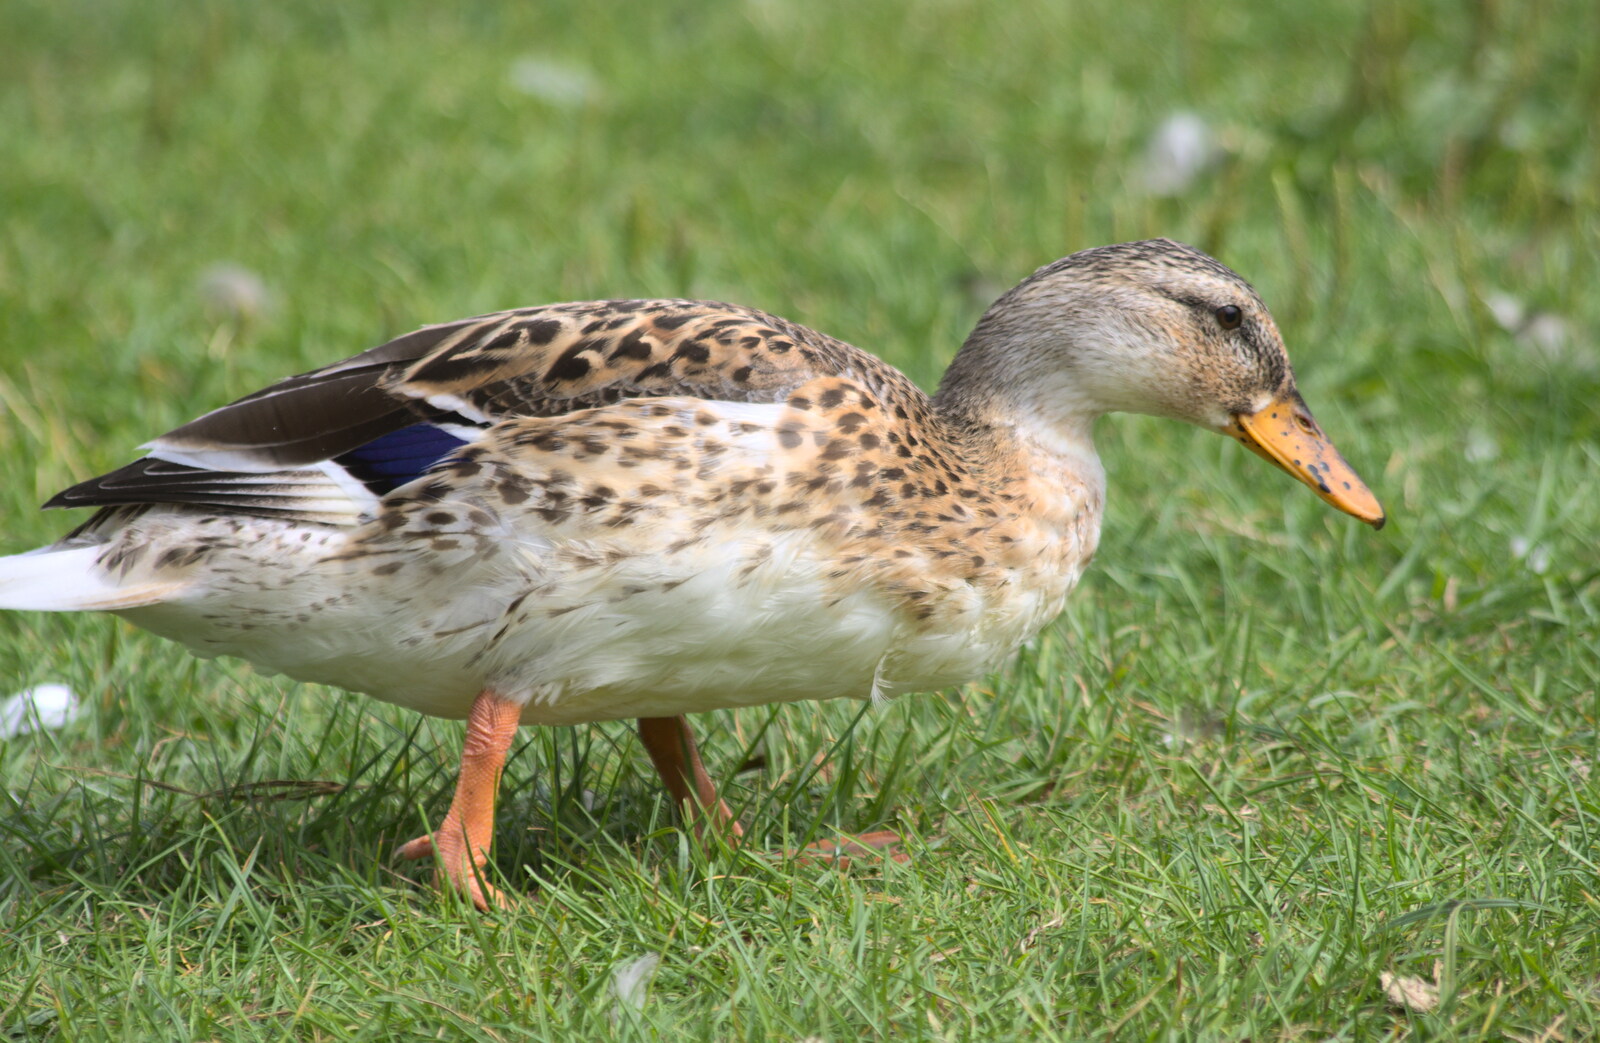 A duck in a patch of green grass from Diss Fest, The Park, Diss, Norfolk - 22nd July 2018